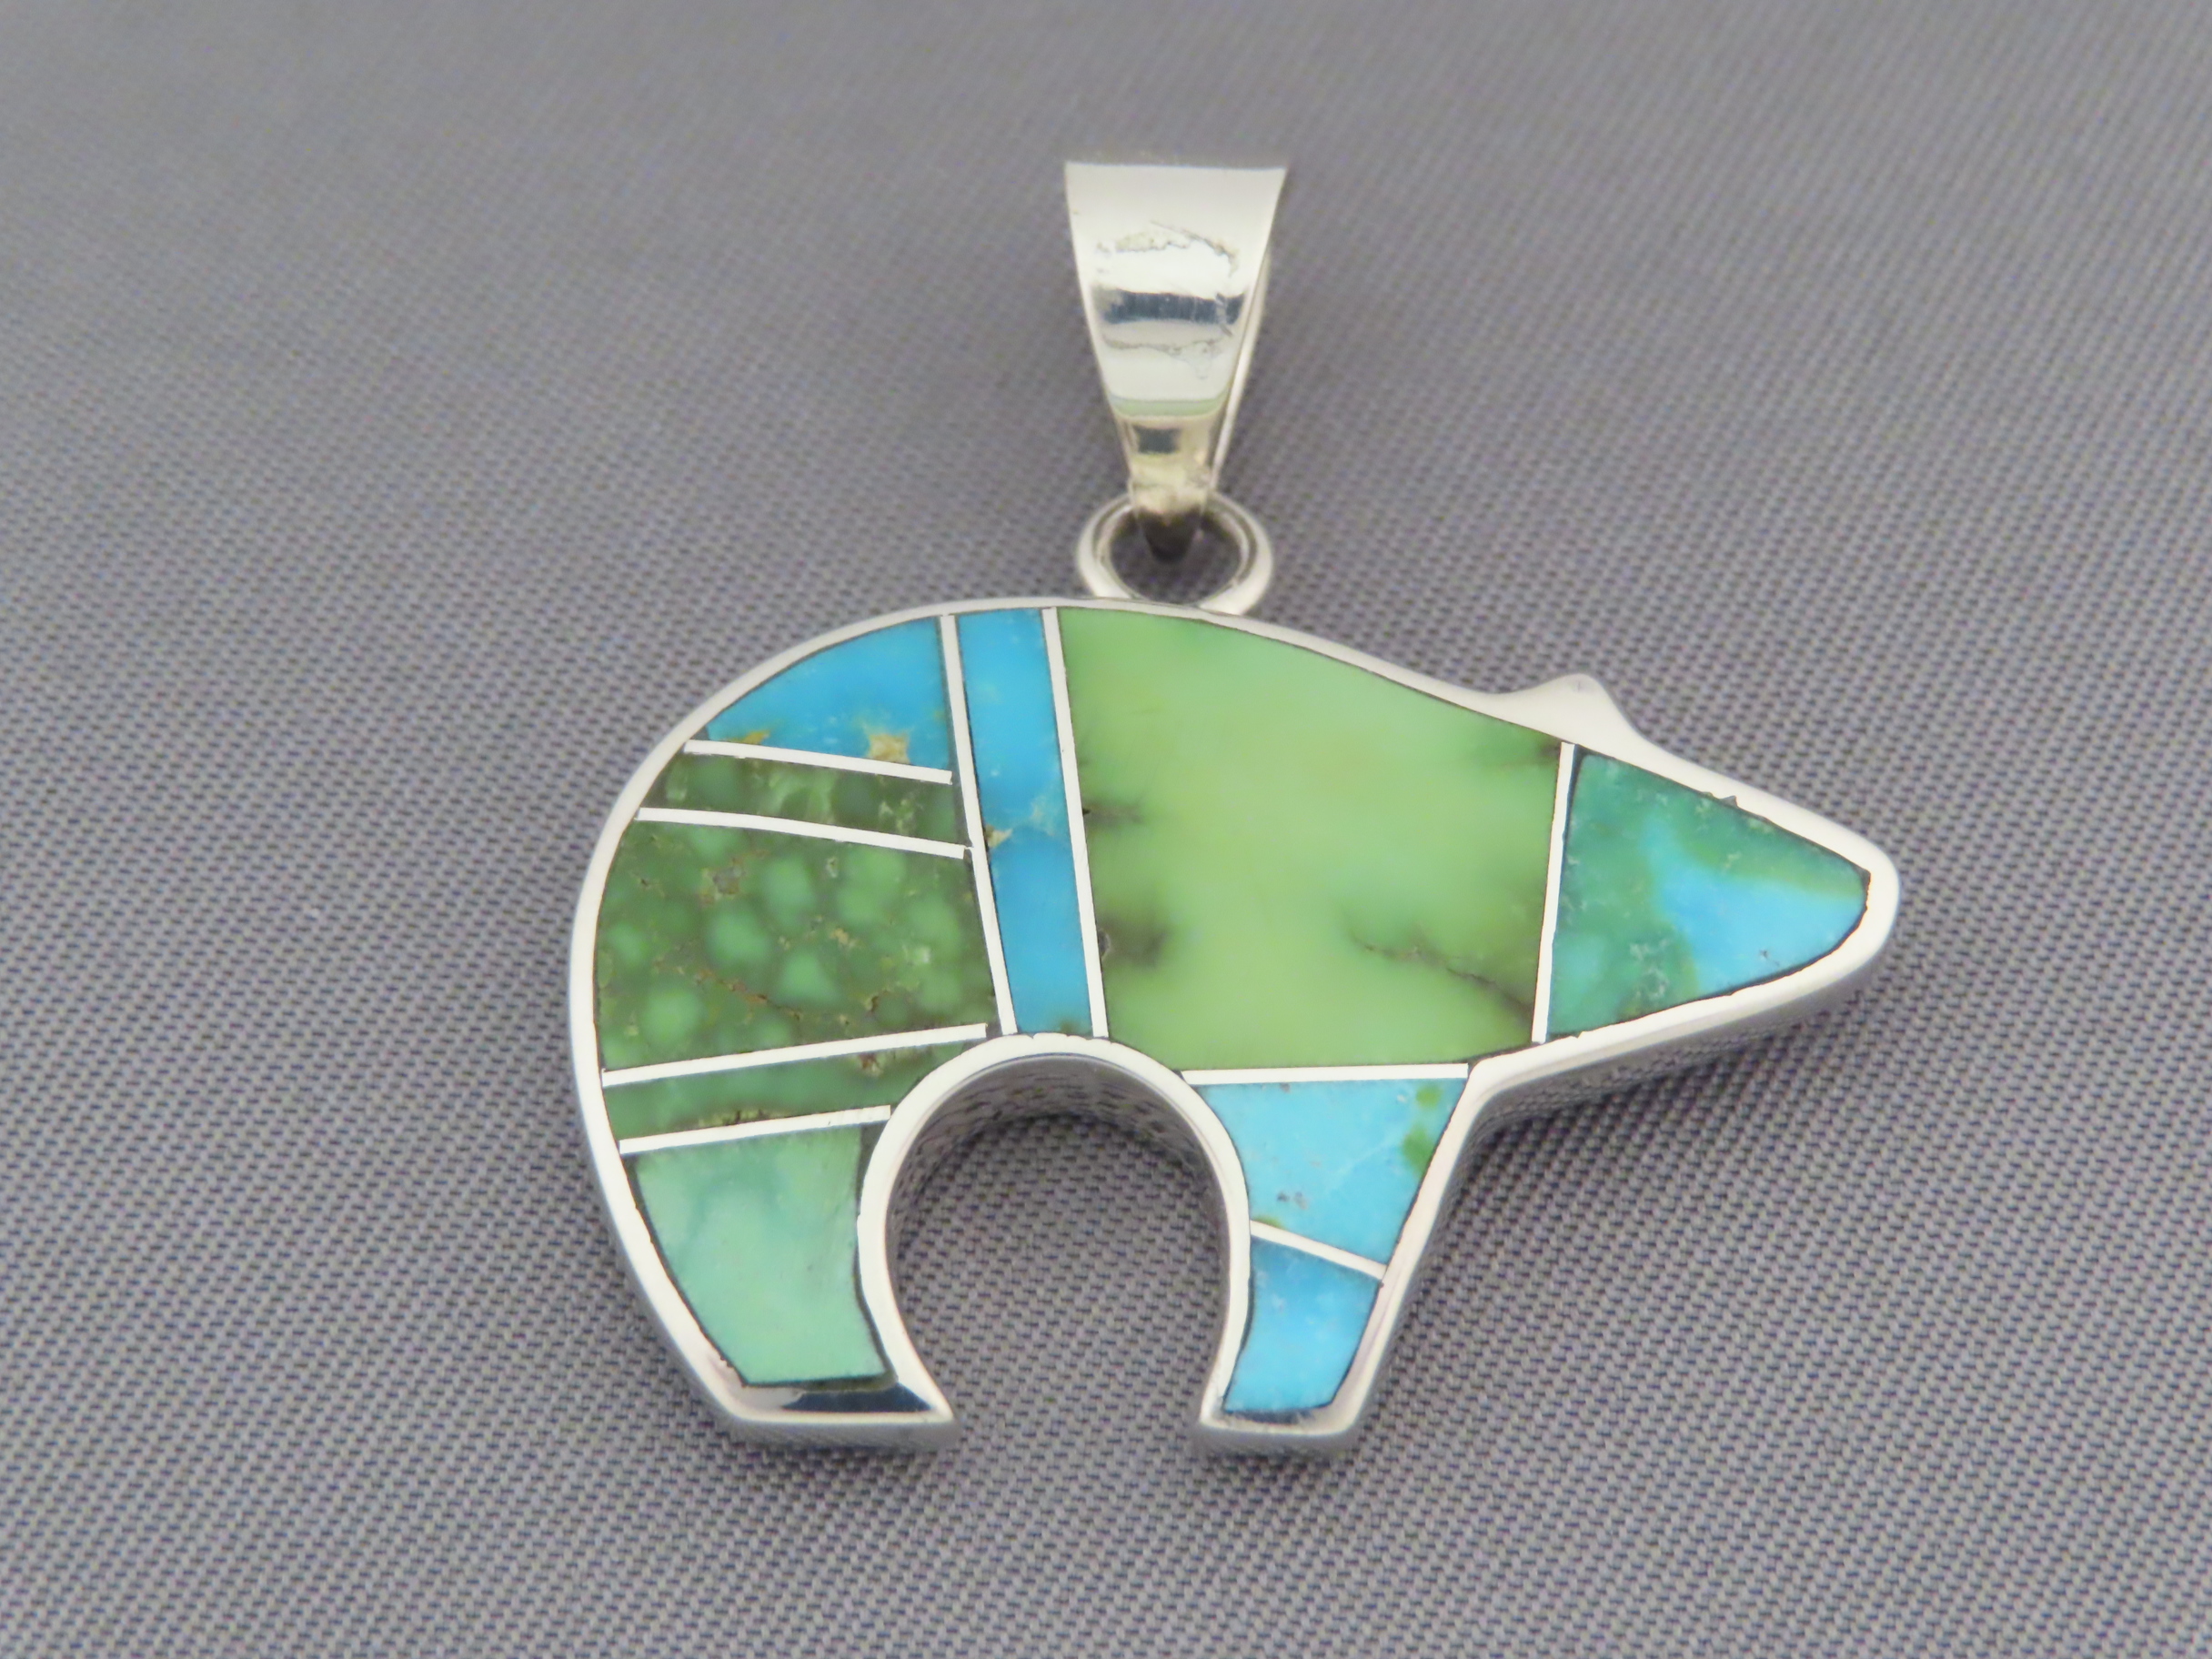 Inlaid Bear - Medium-Size Sonoran Gold Turquoise Inlay BEAR Pendant by Native American jeweler, Peterson Chee FOR SALE $265-